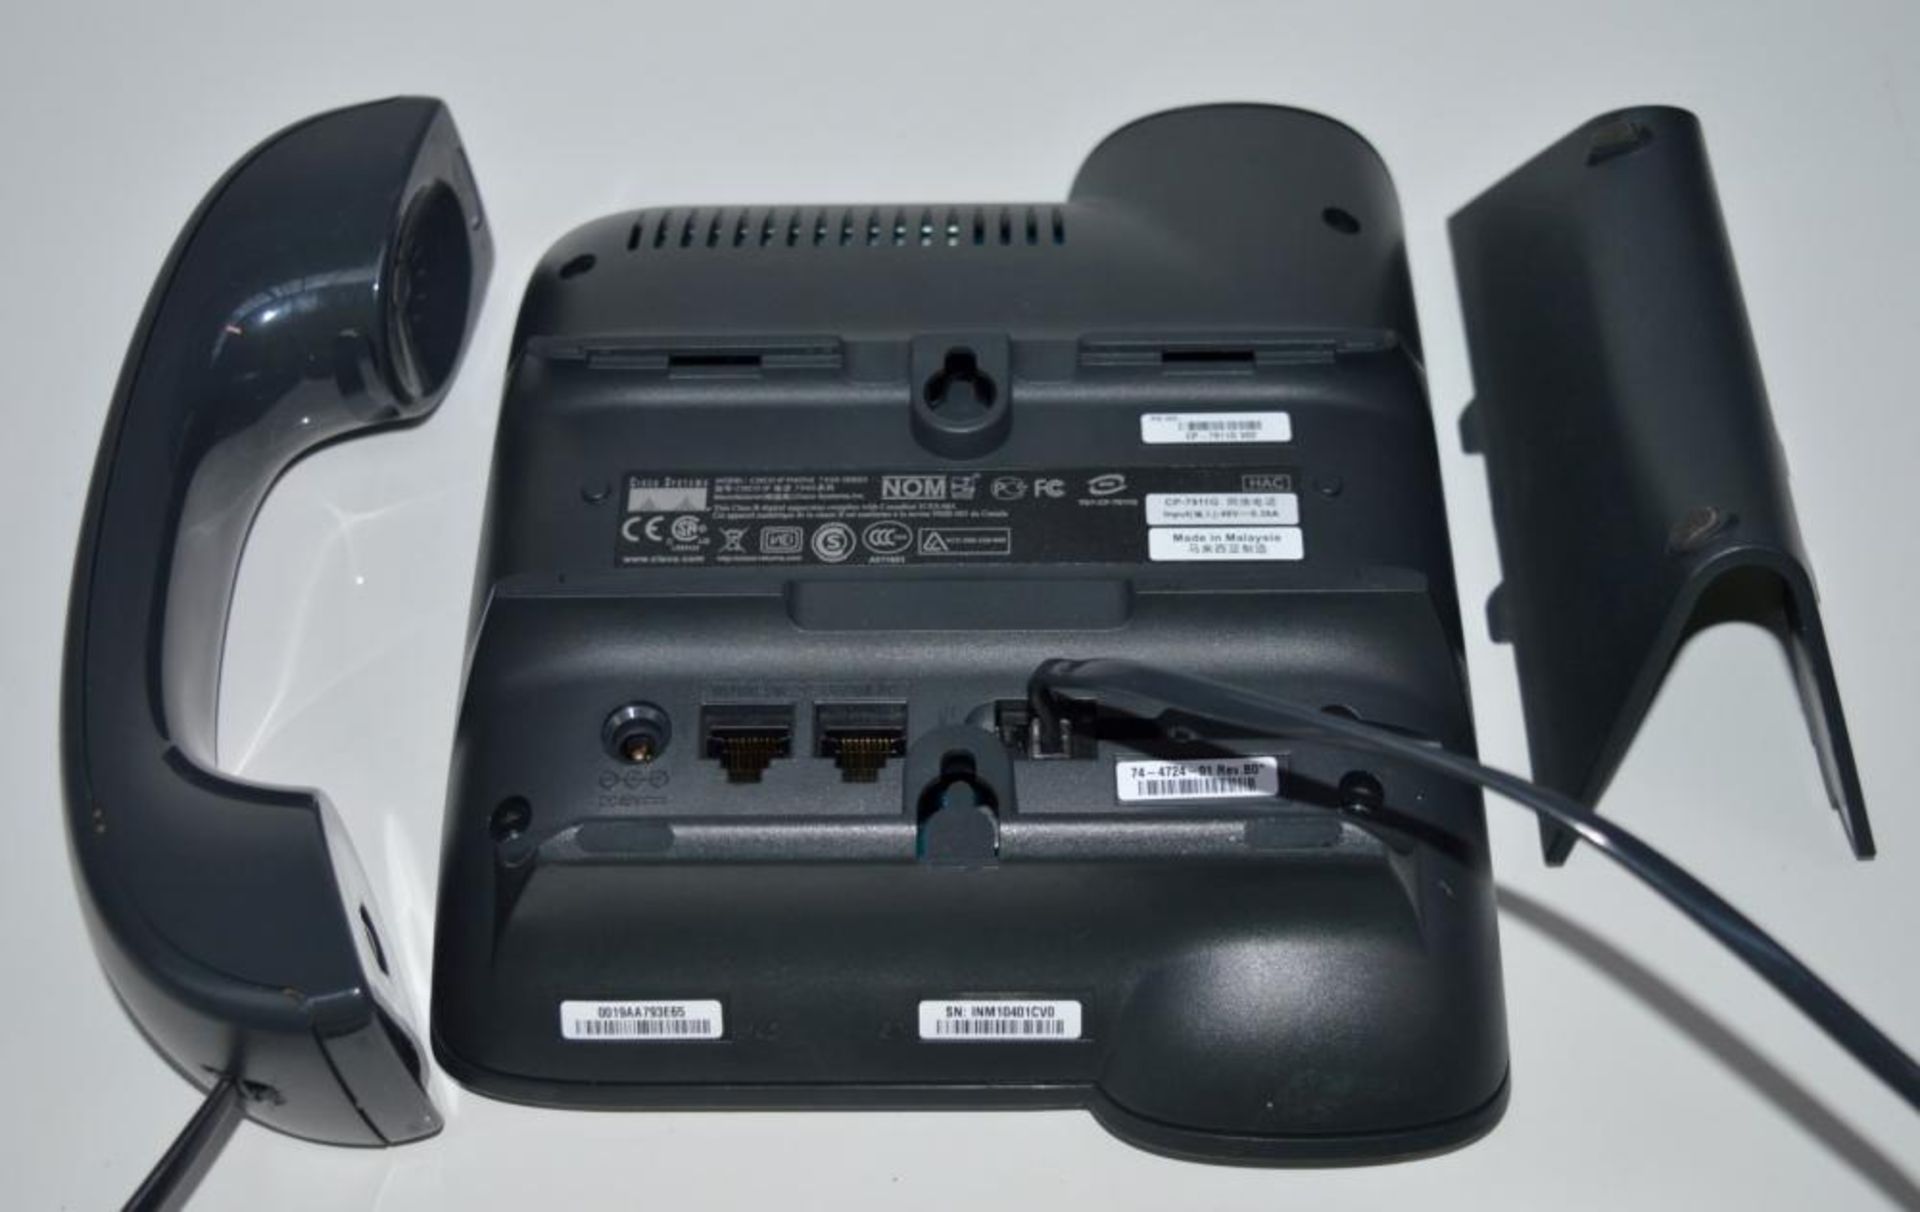 4 x Cisco CP-7911G Unified IP SIP Phones - Removed From a Working Office Environment in Good Conditi - Image 3 of 8